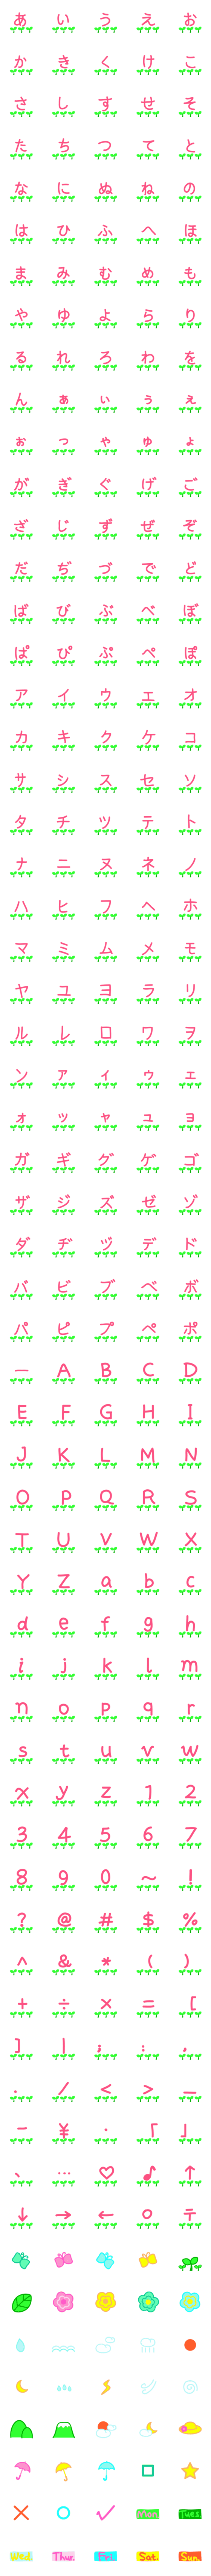 [LINE絵文字]Lovely Spring2-Kana letters Emoji 305pcsの画像一覧